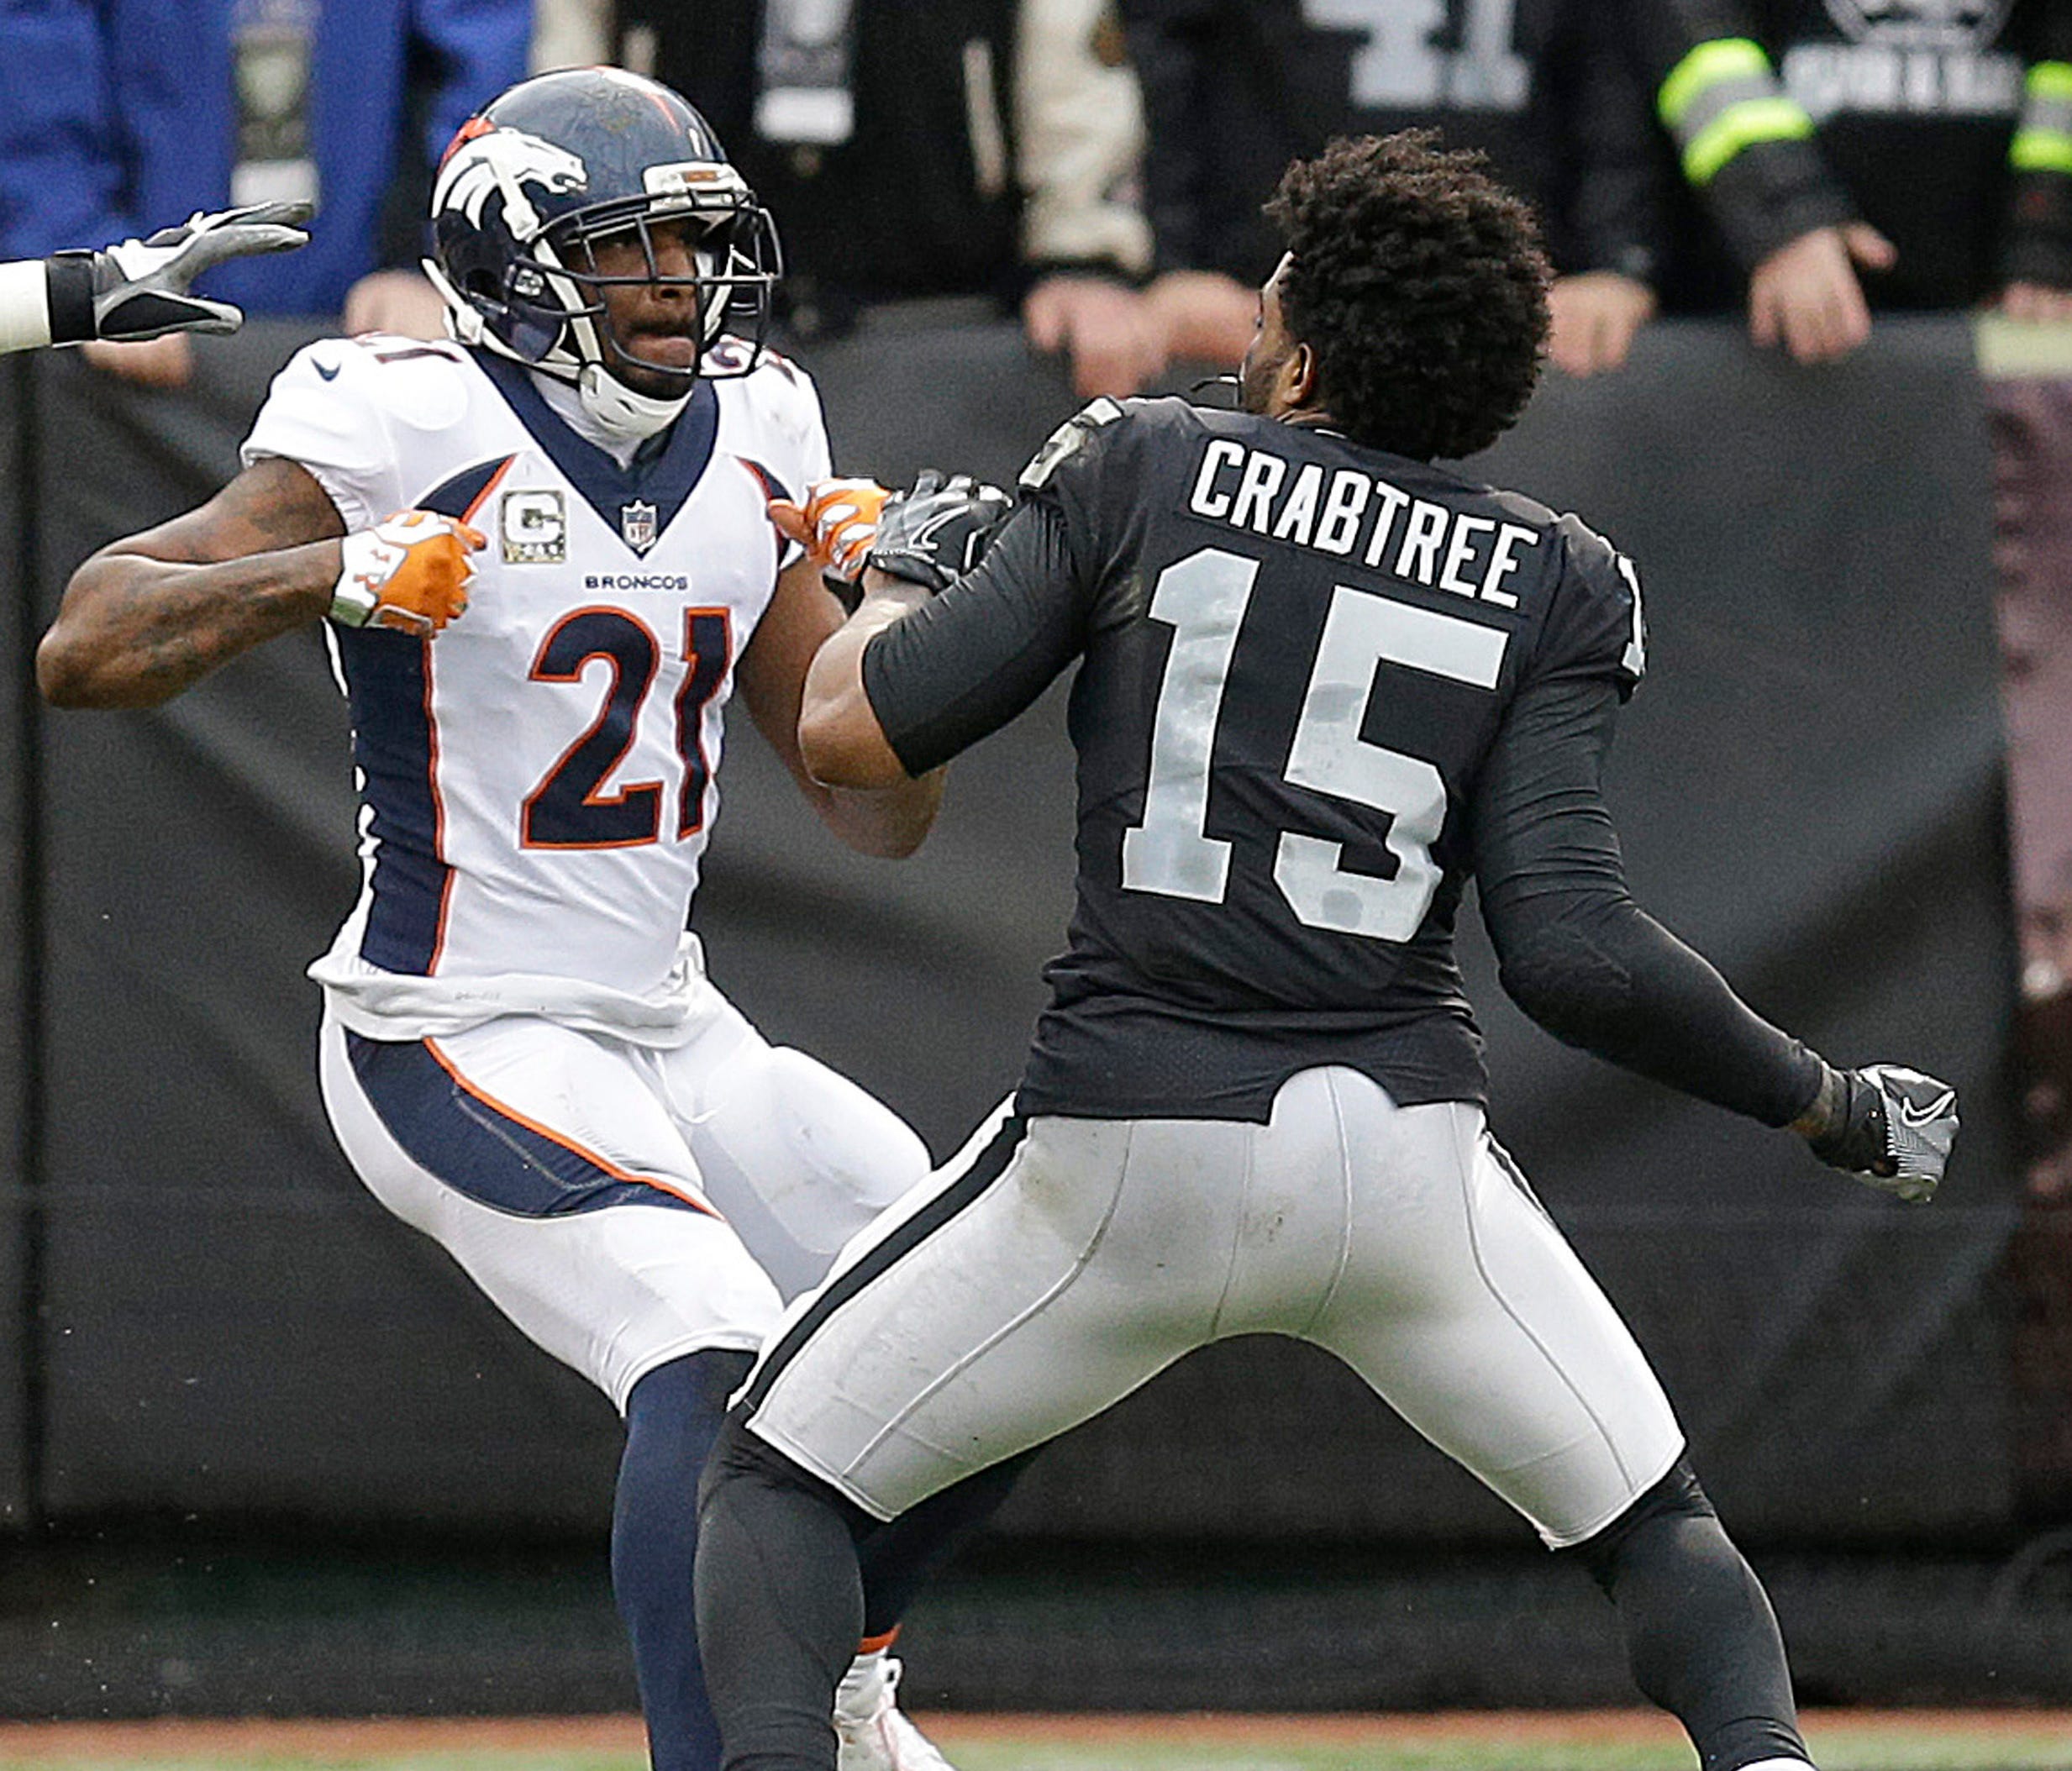 Denver Broncos cornerback Aqib Talib (21) fights Oakland Raiders wide receiver Michael Crabtree (15) during the first half of an NFL football game in Oakland, Calif., Sunday, Nov. 26, 2017.